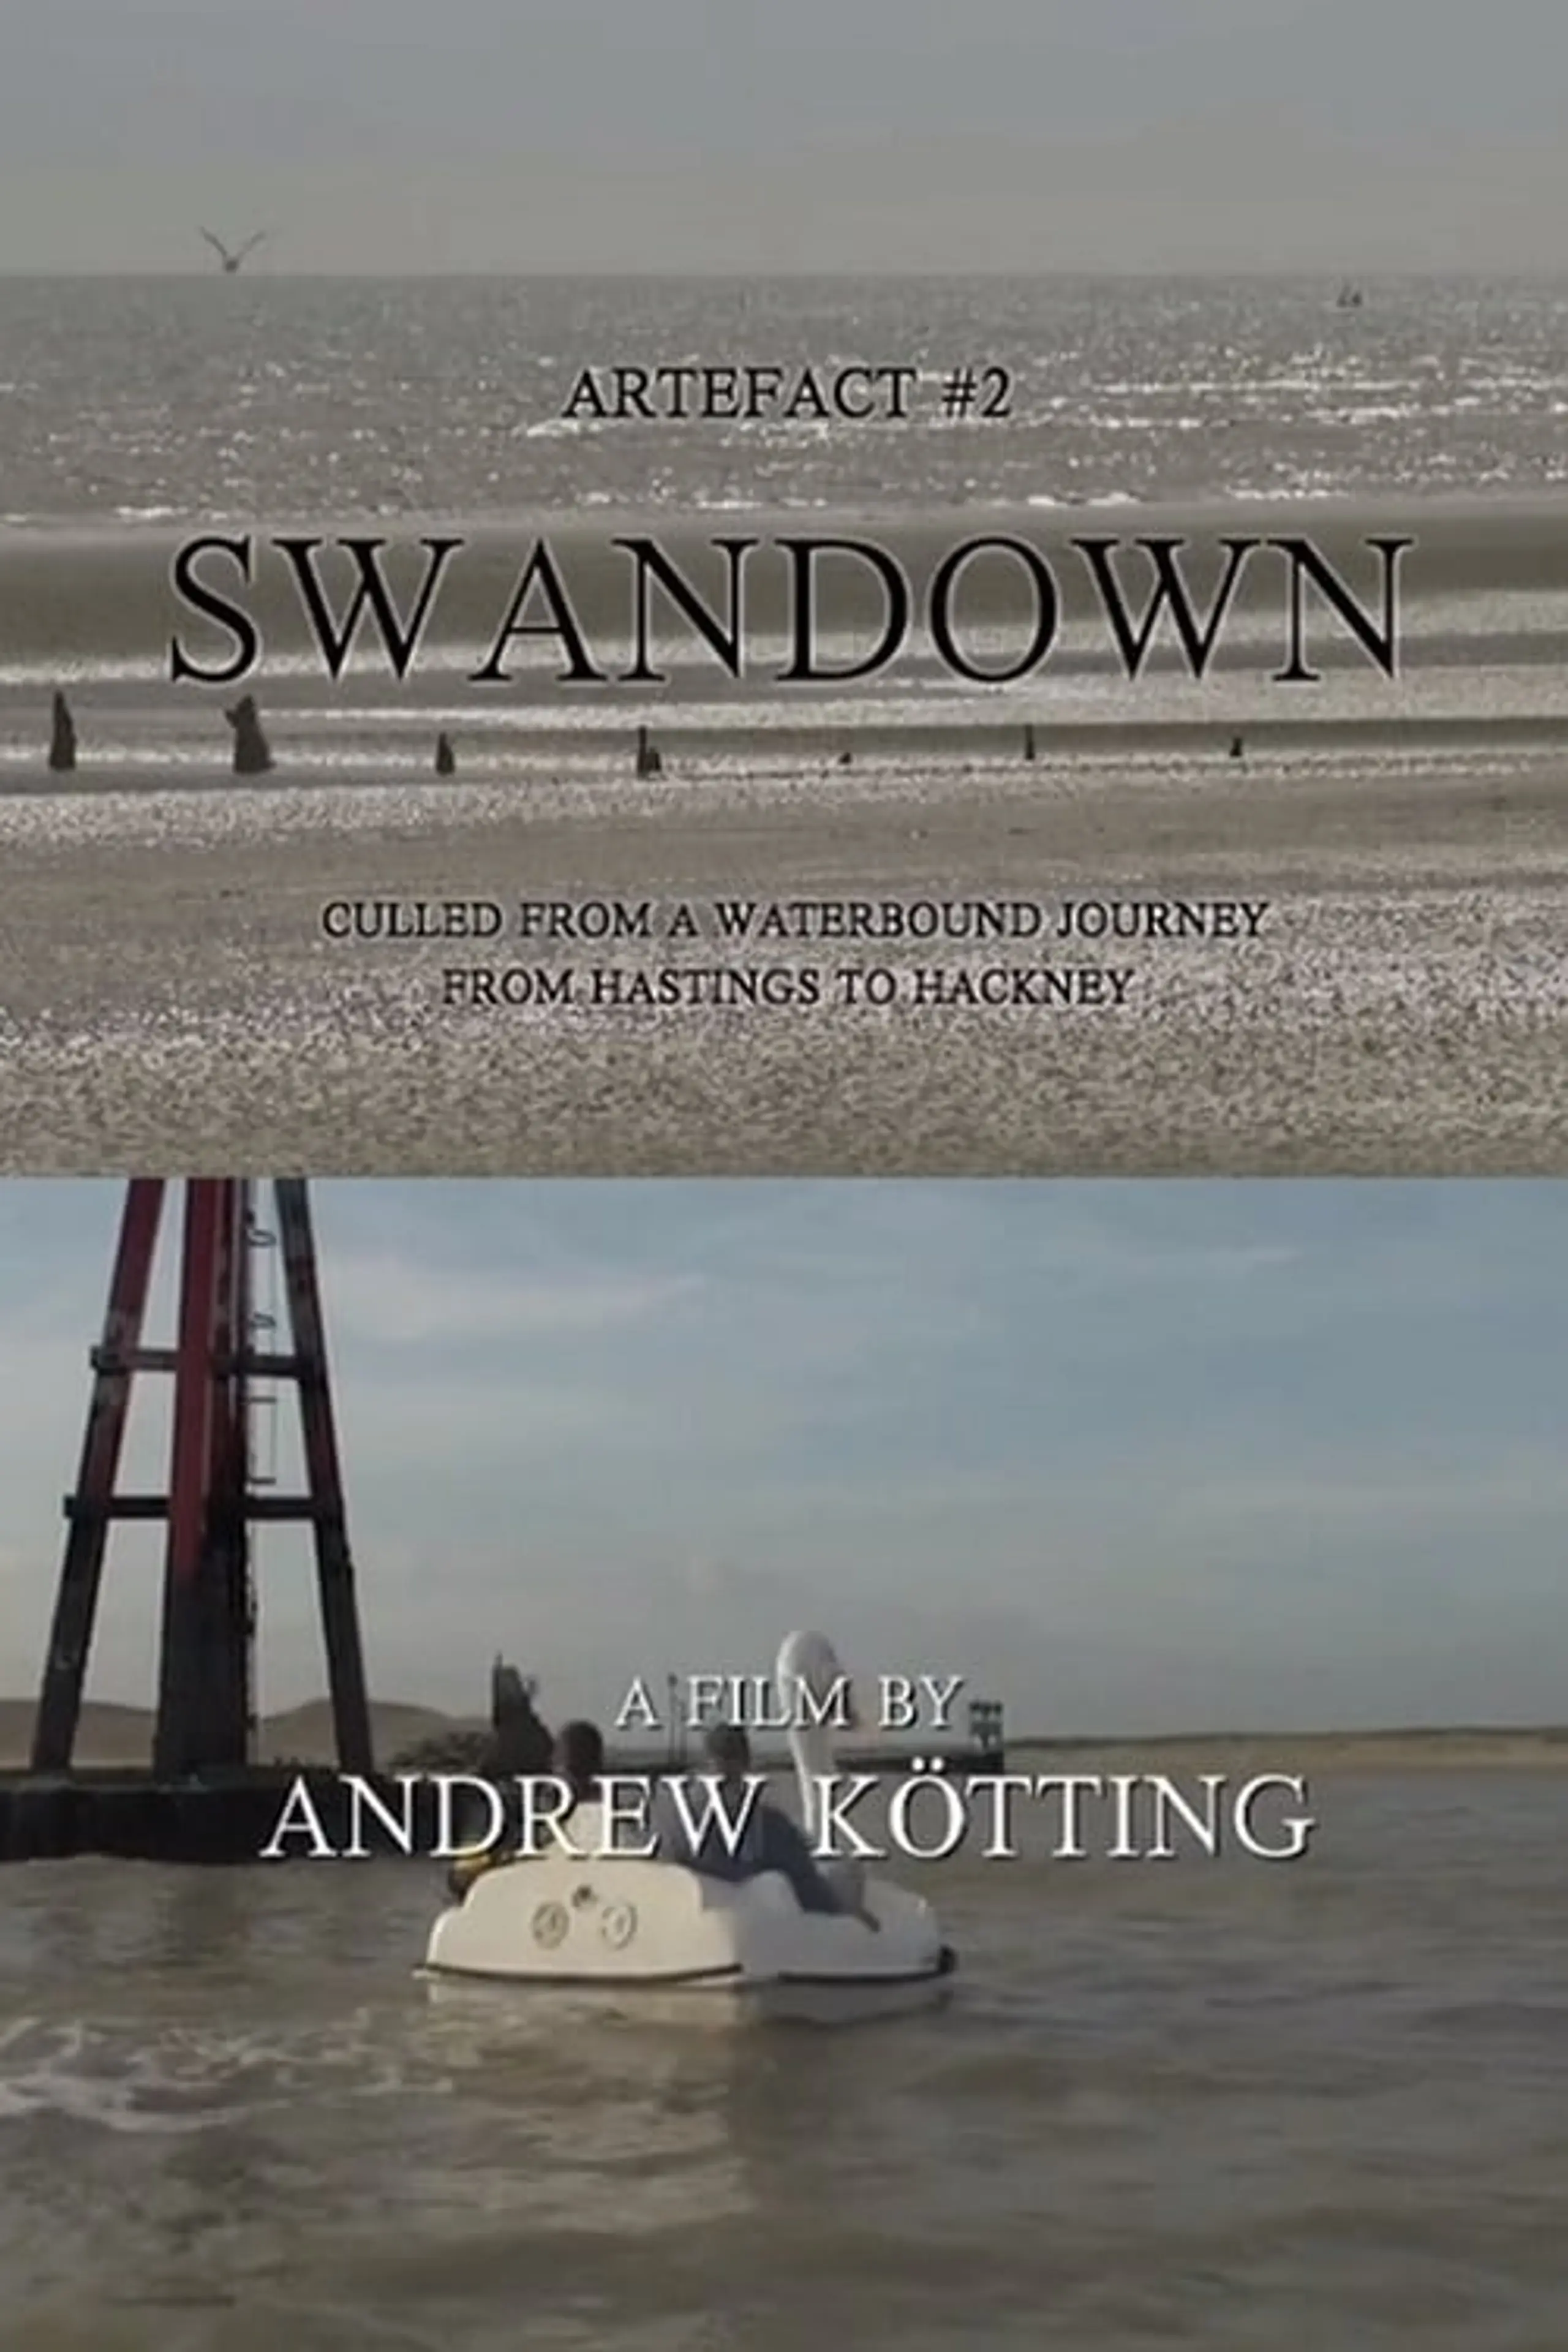 Artefact #2: Swandown – Culled from a Waterbound Journey from Hastings to Hackney